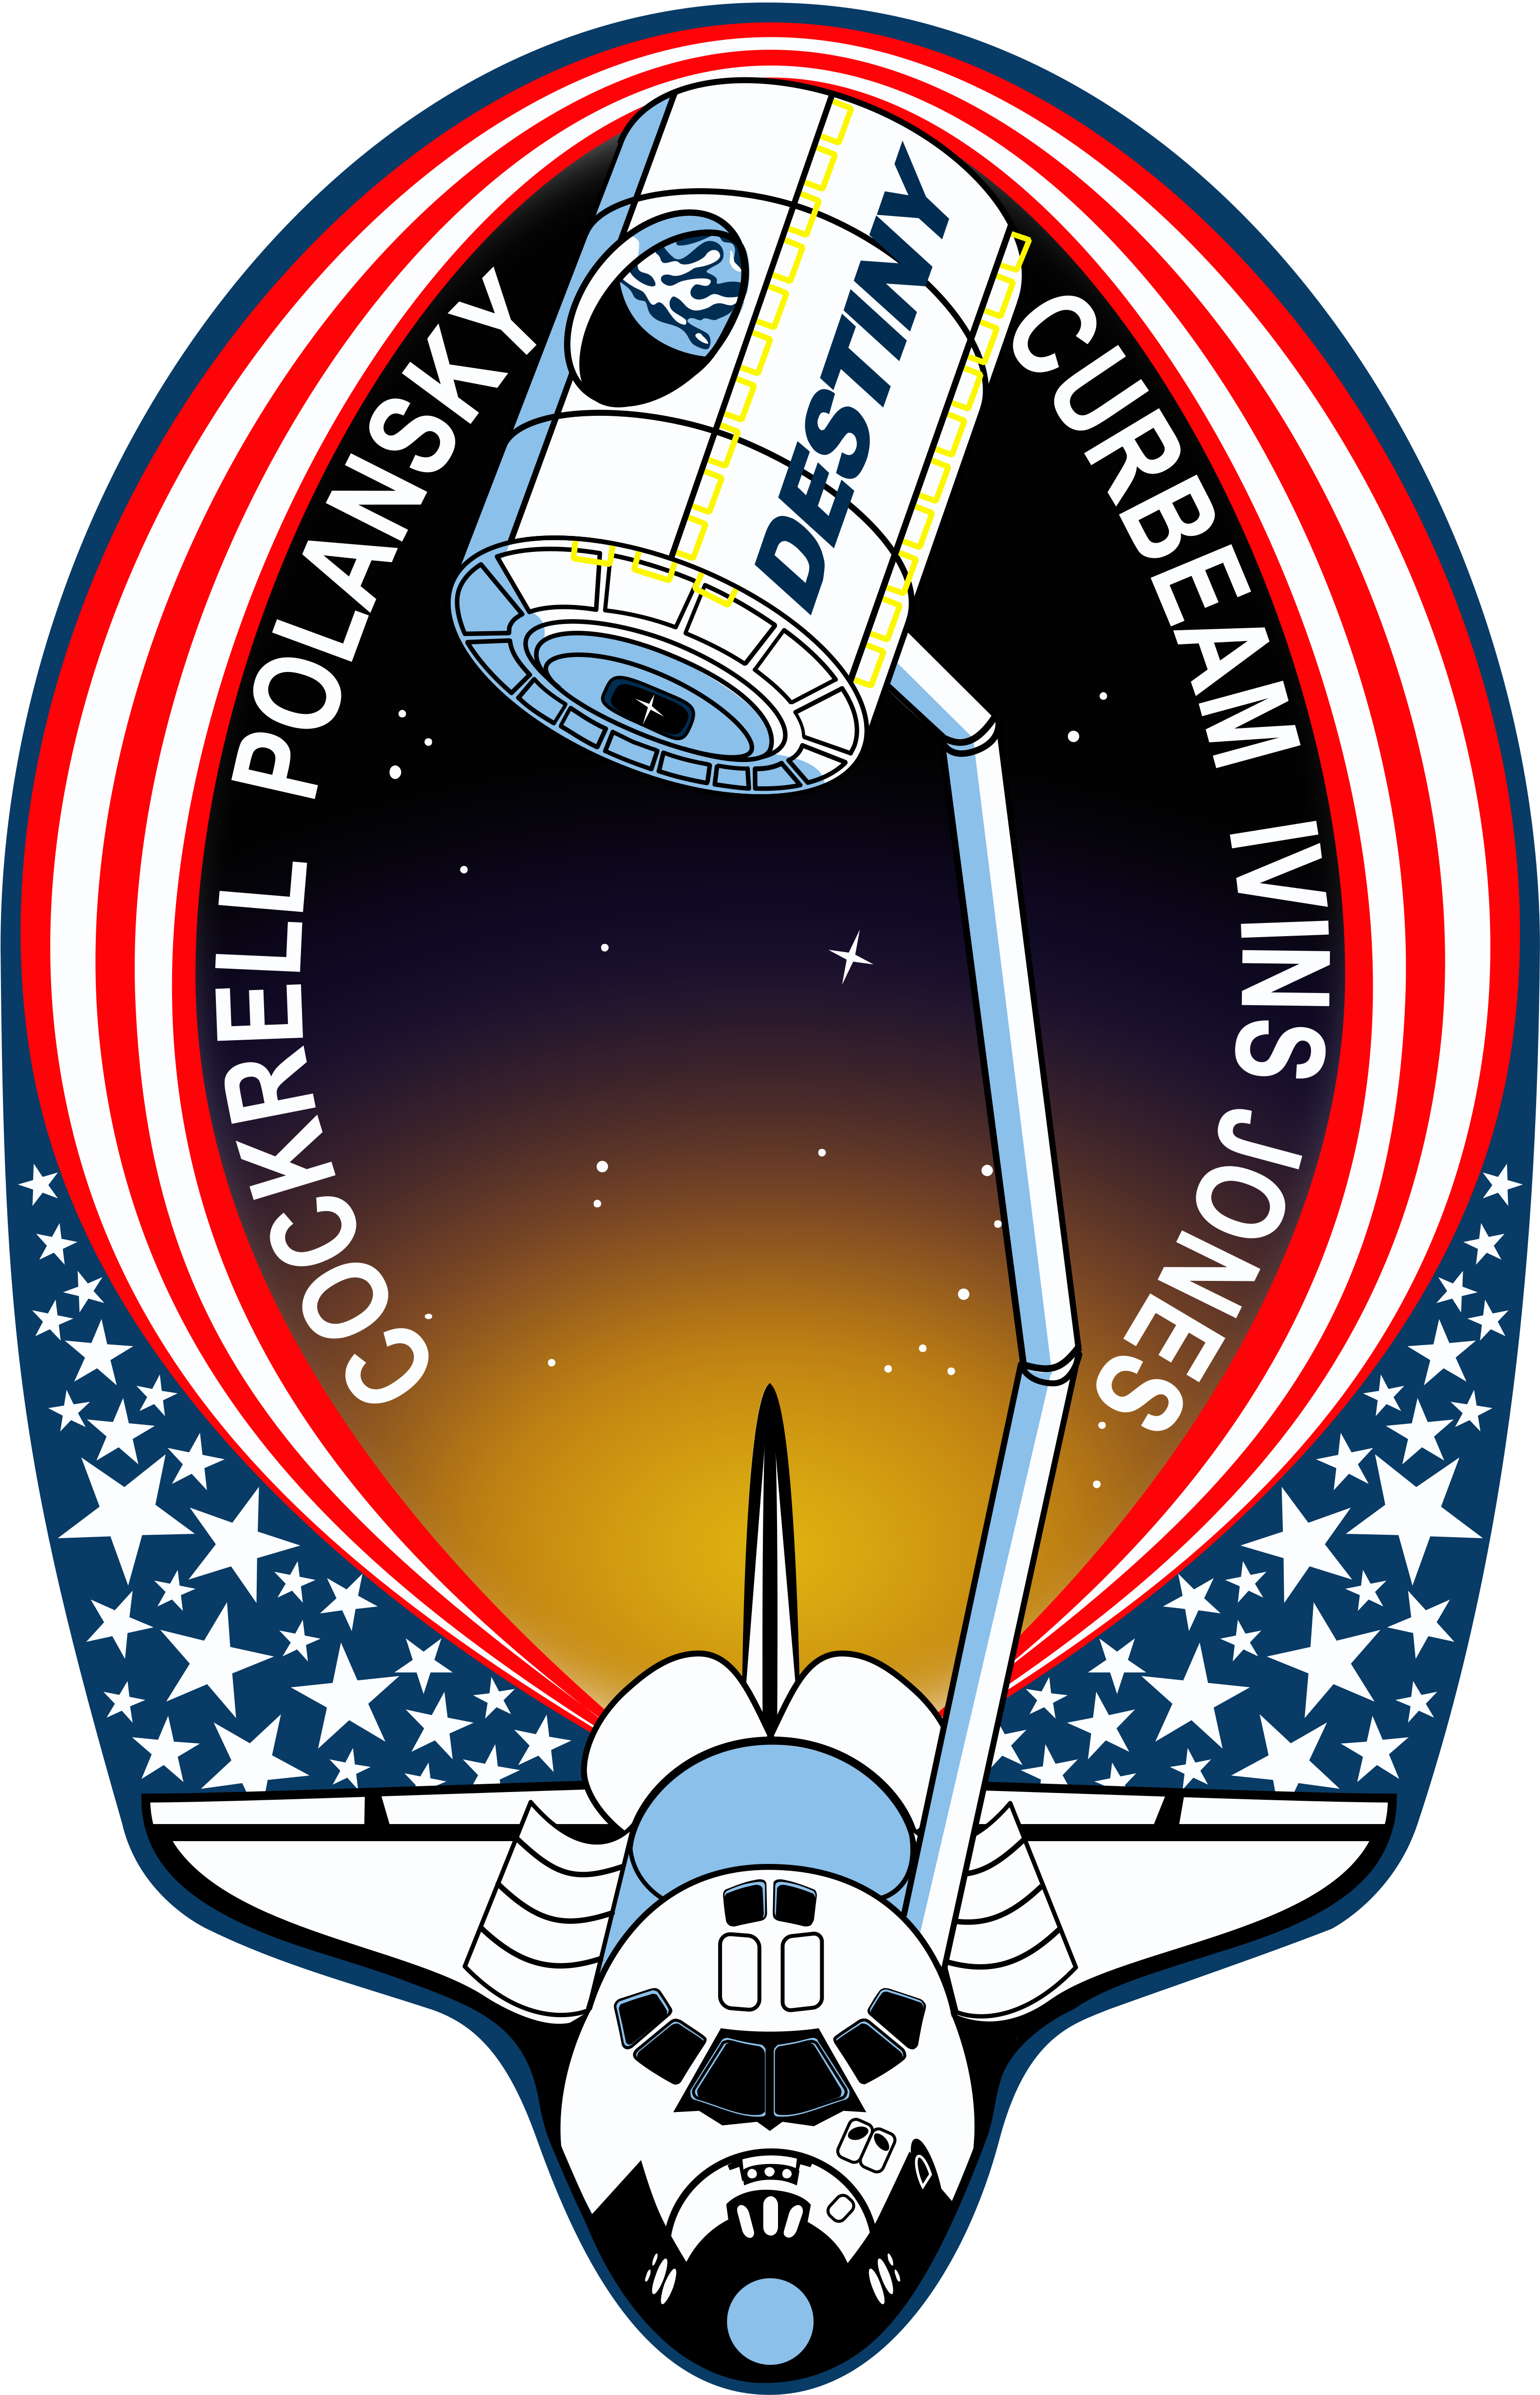 Sts 98 Patch - Sts 98 Mission Patch (3320x5000)